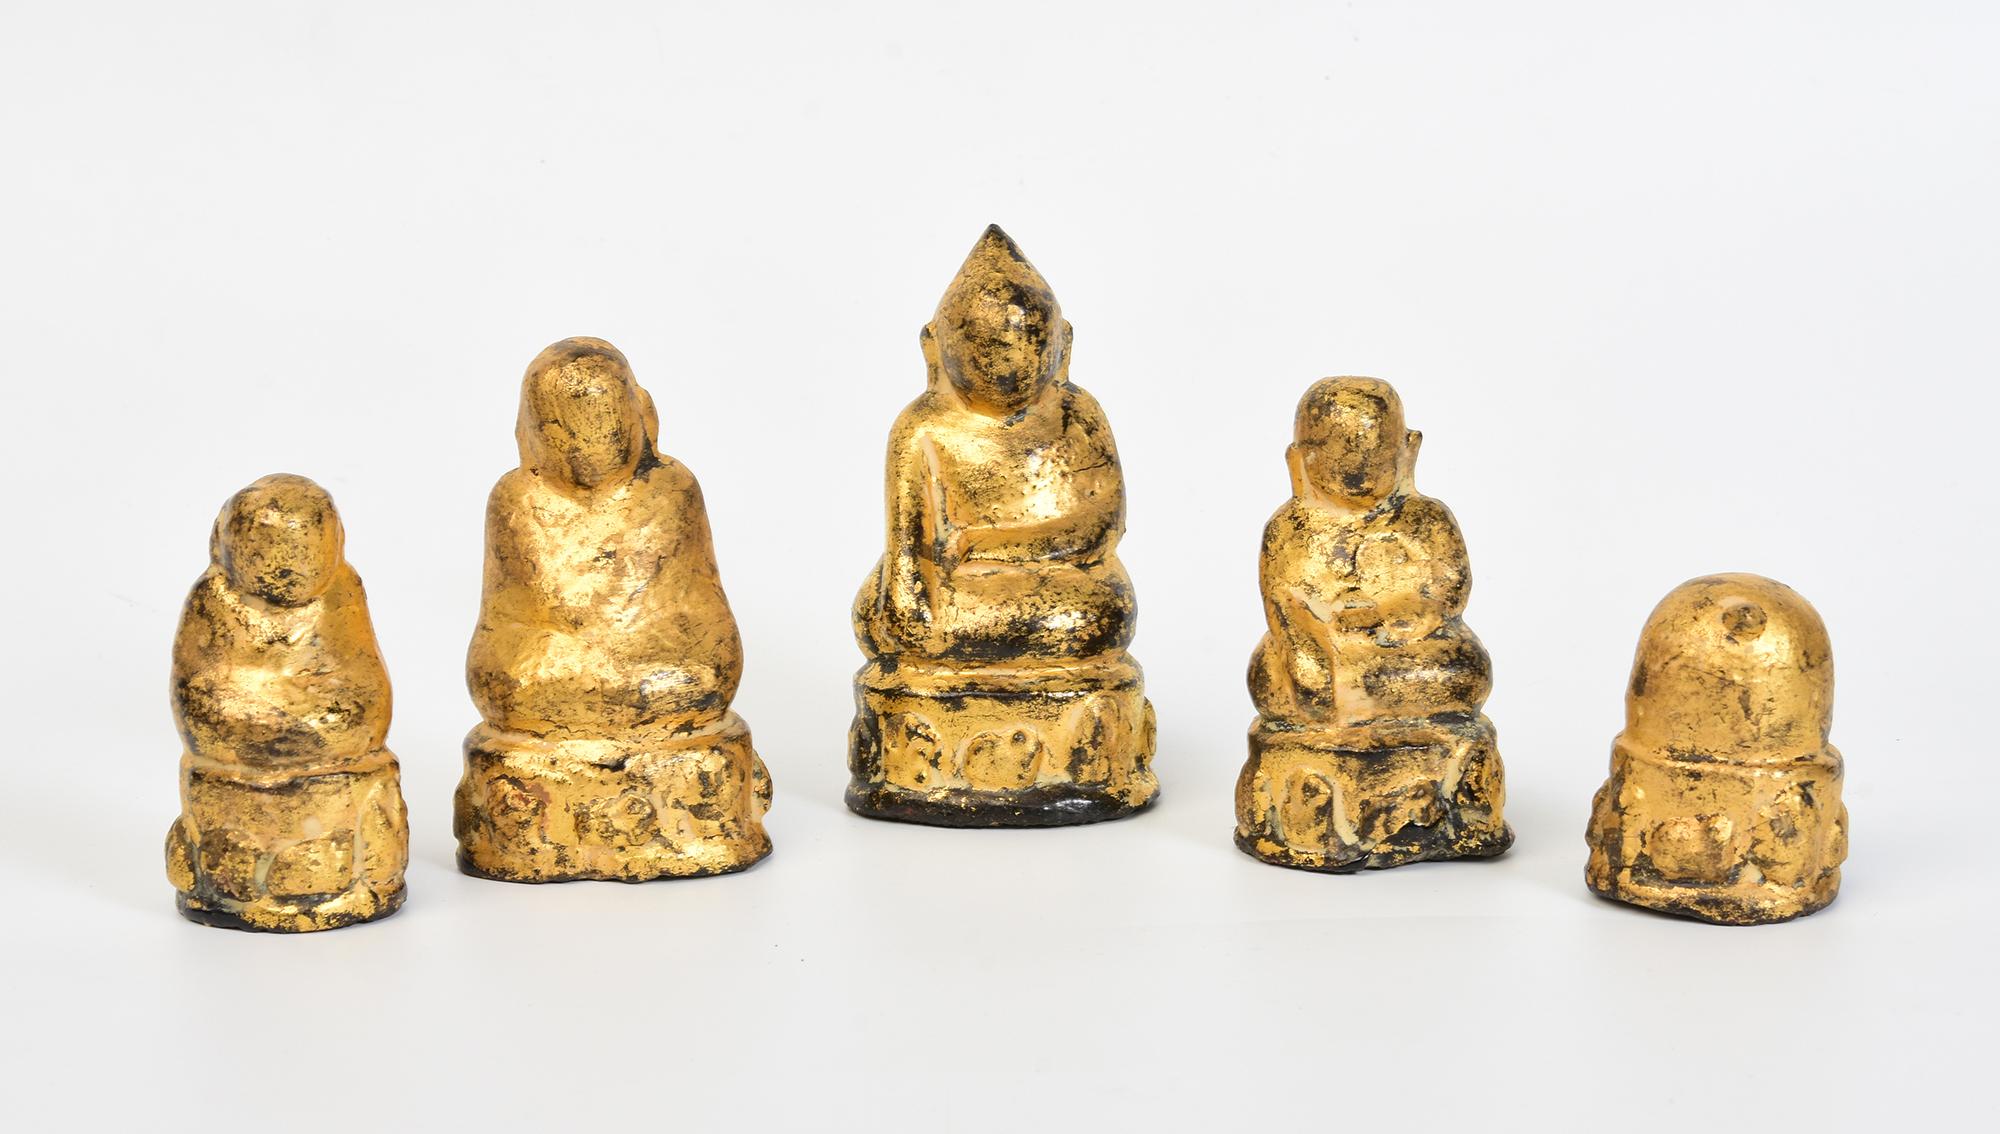 A set of antique Burmese amulets in lacquered wood and gilded with gold leaf. 
It is believed that this type of statuette had special powers due to the paste made from sacred ashes and medicinal herbs, which was inserted into the hole in the base of